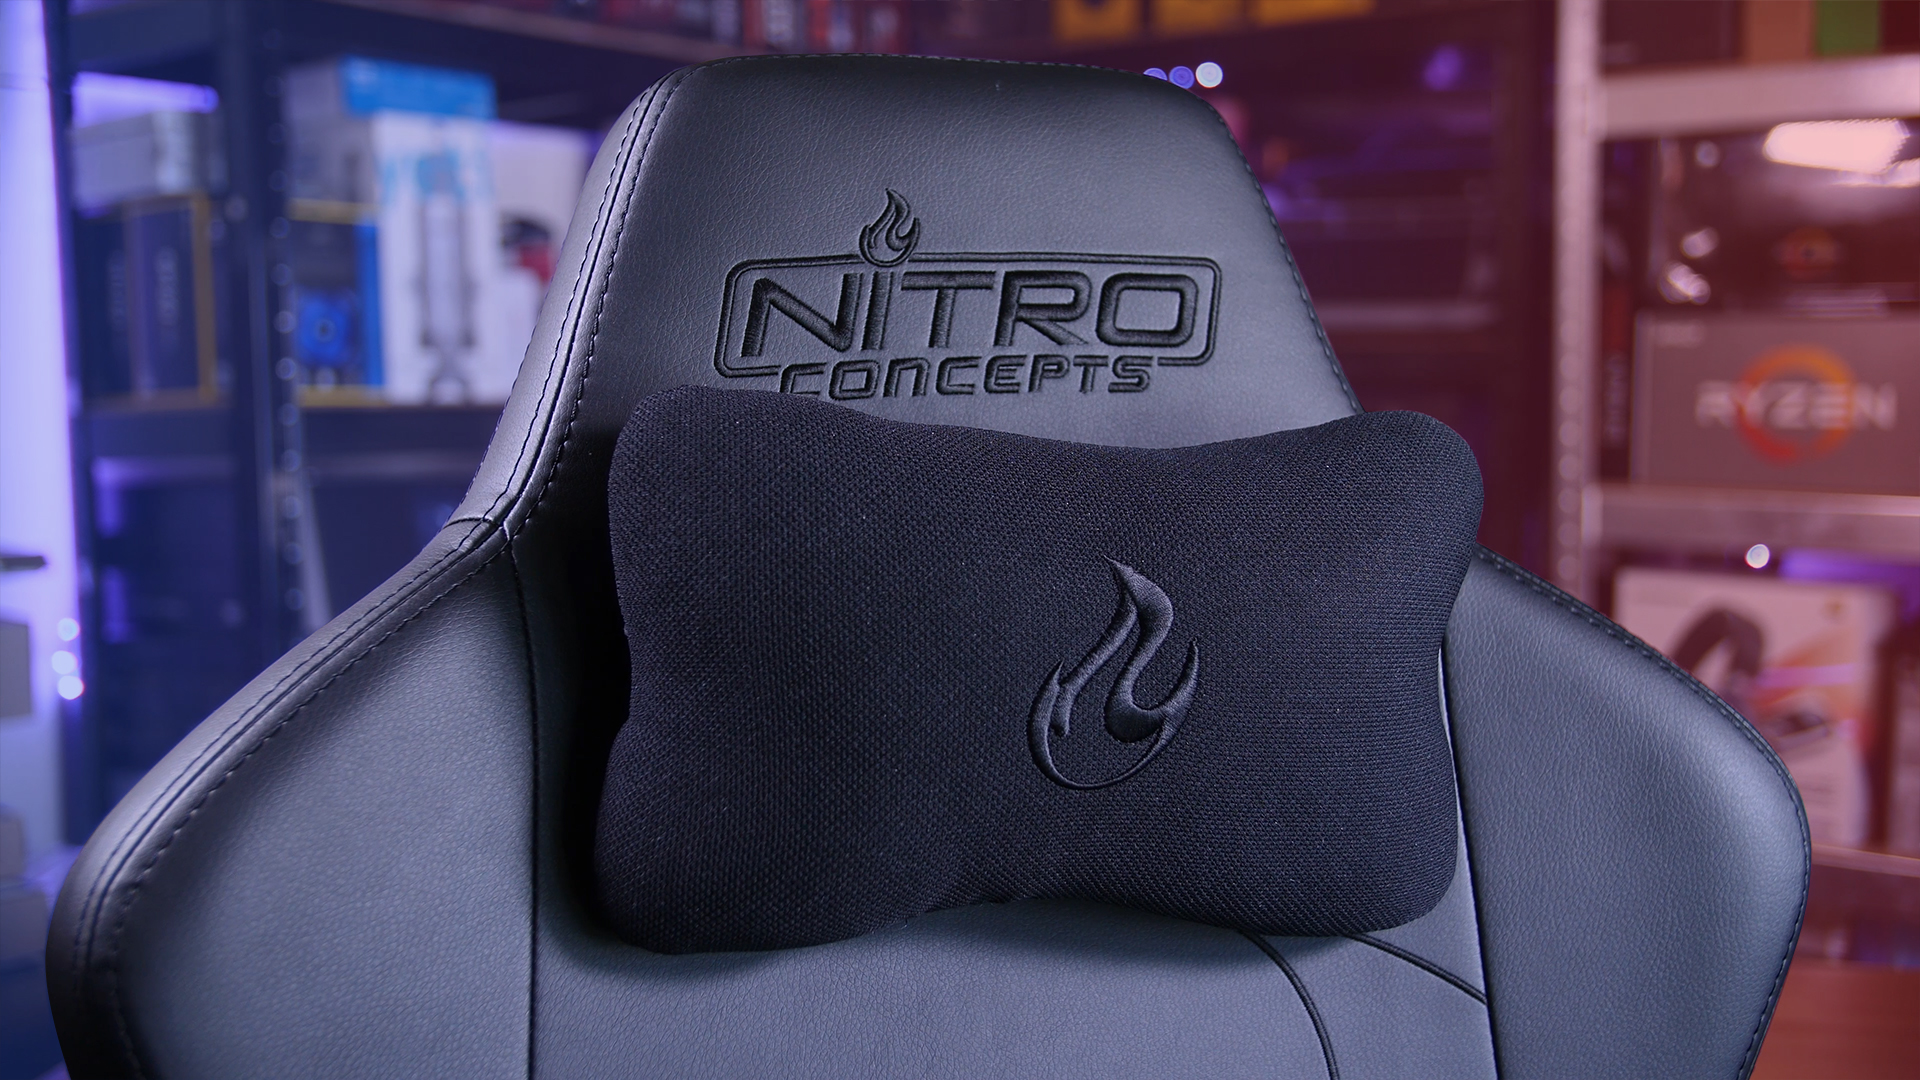 Nitro Concepts S300ex Gaming Chair Review Techteamgb